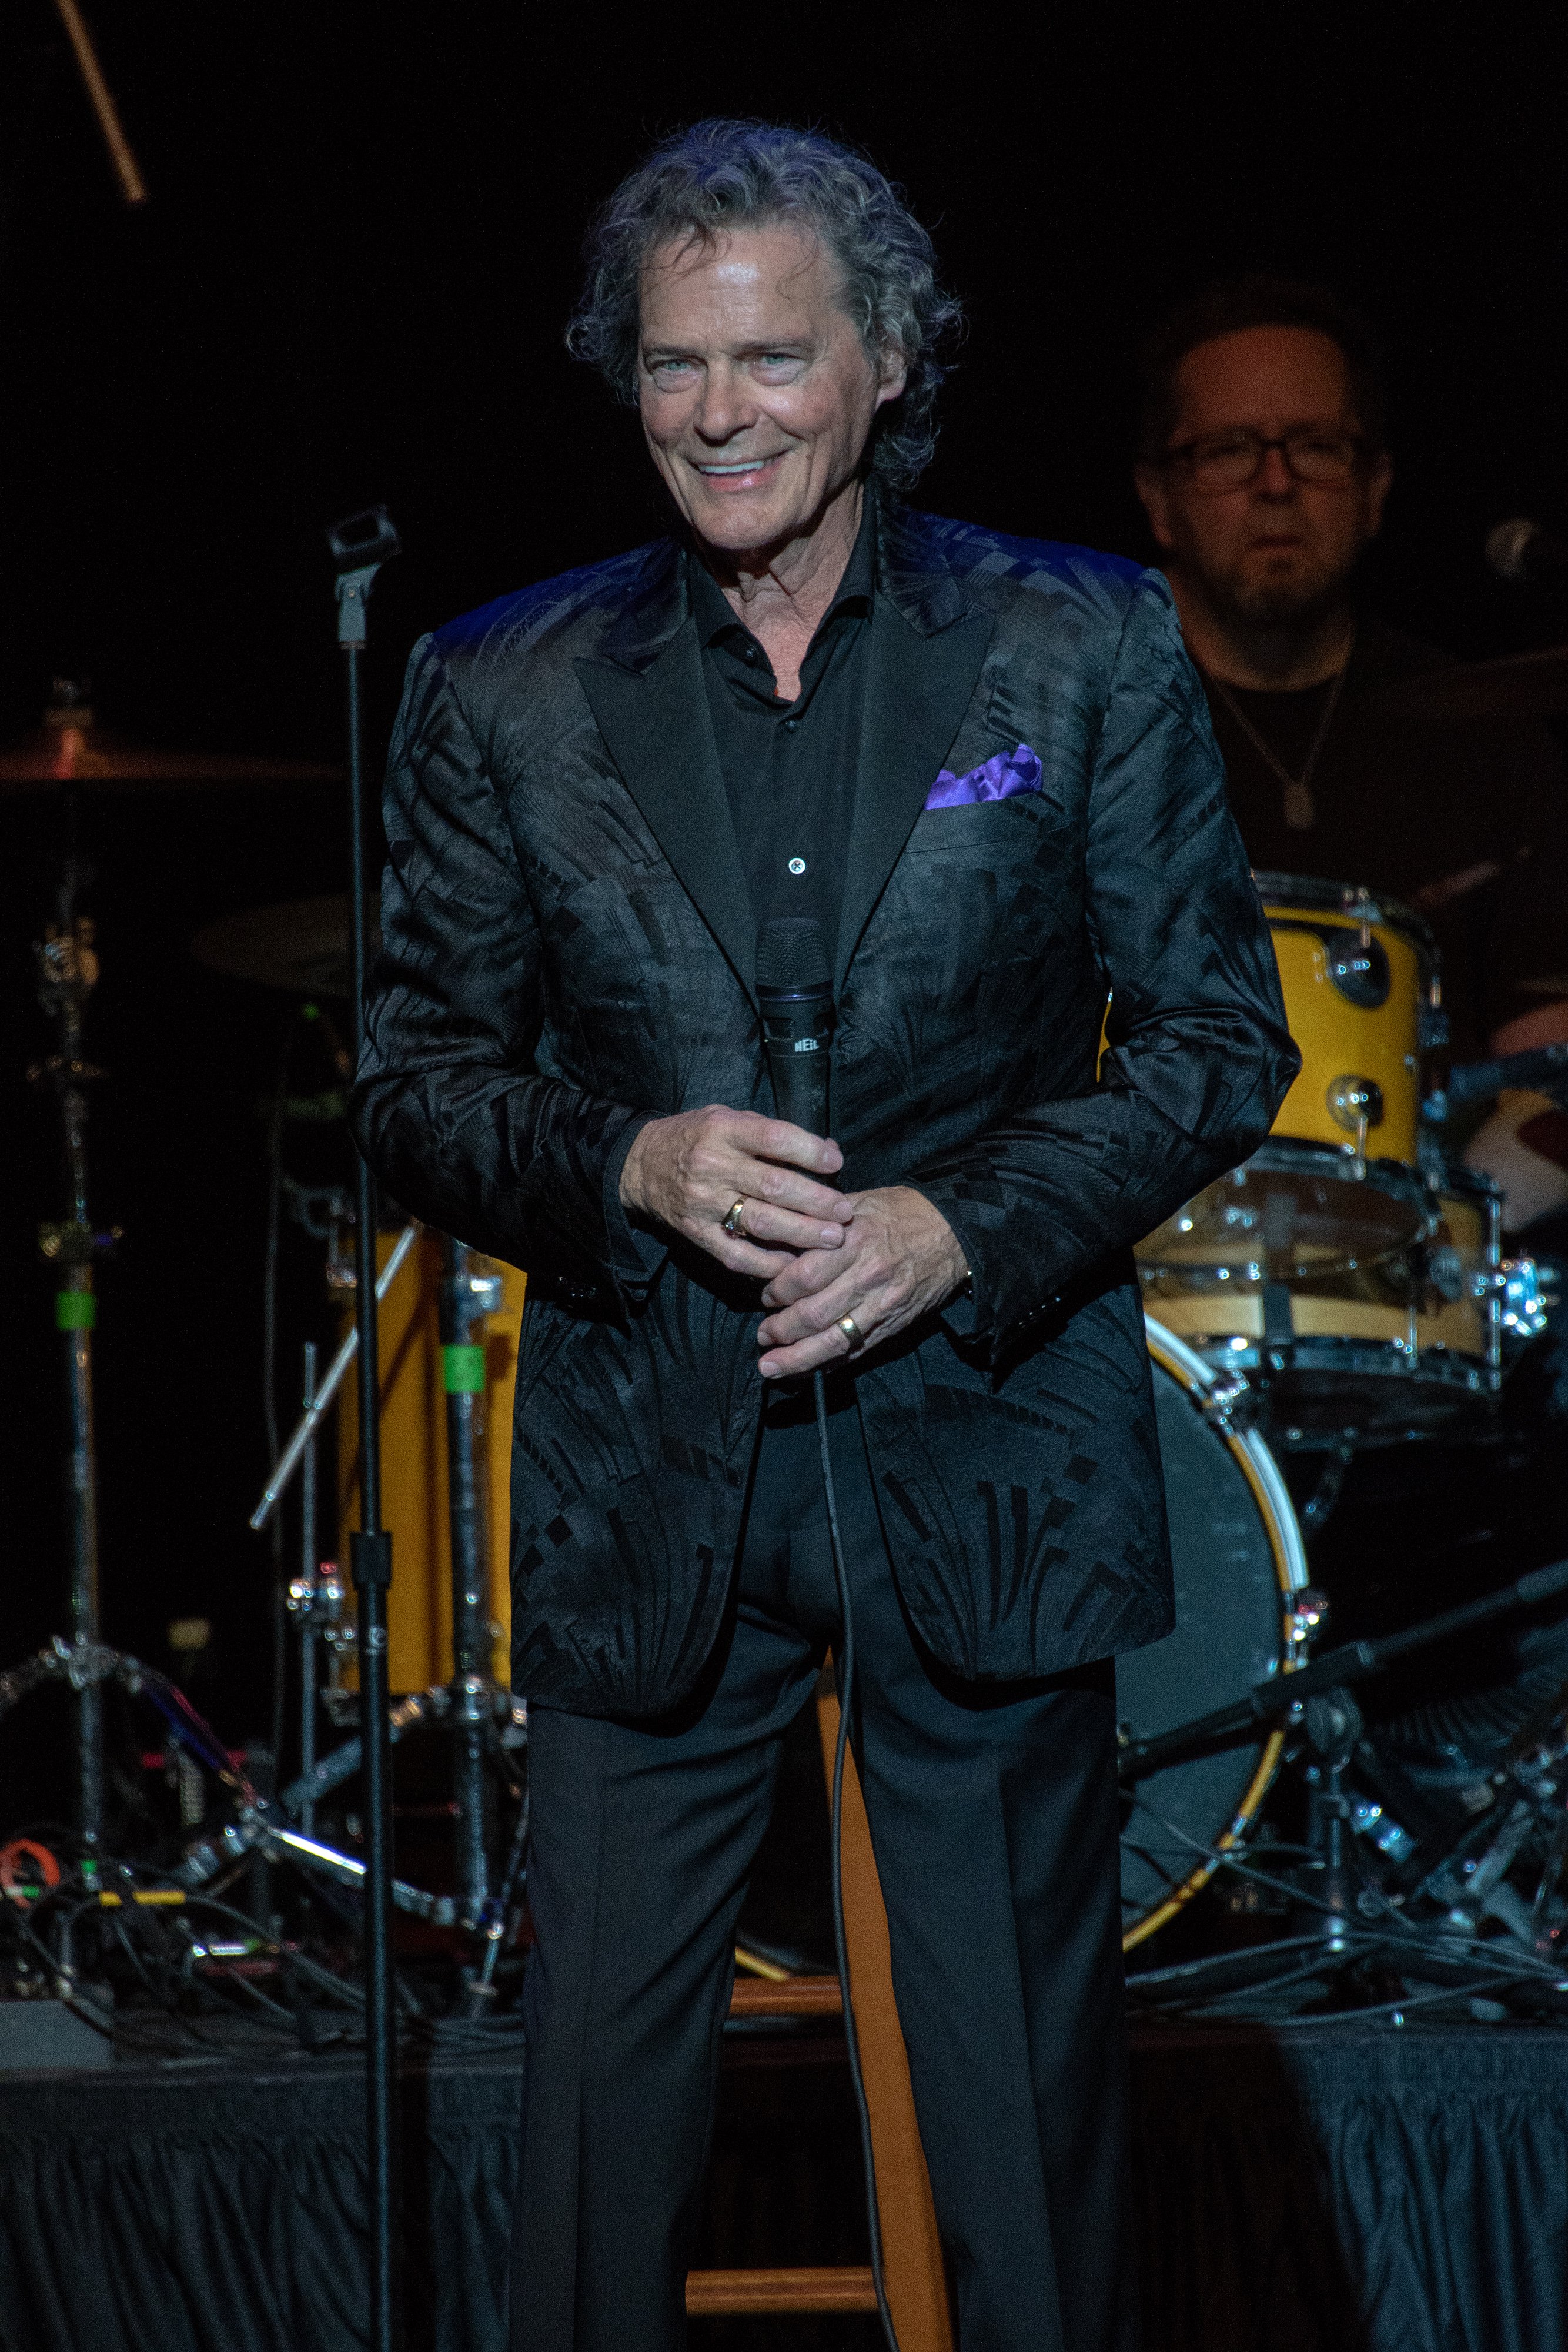 BJ Thomas performs "Raindrops Keep Falling On My Head" and "Somebody Done Somebody Wrong" on stage at the historic Granada Theater | Photo: Shutterstock